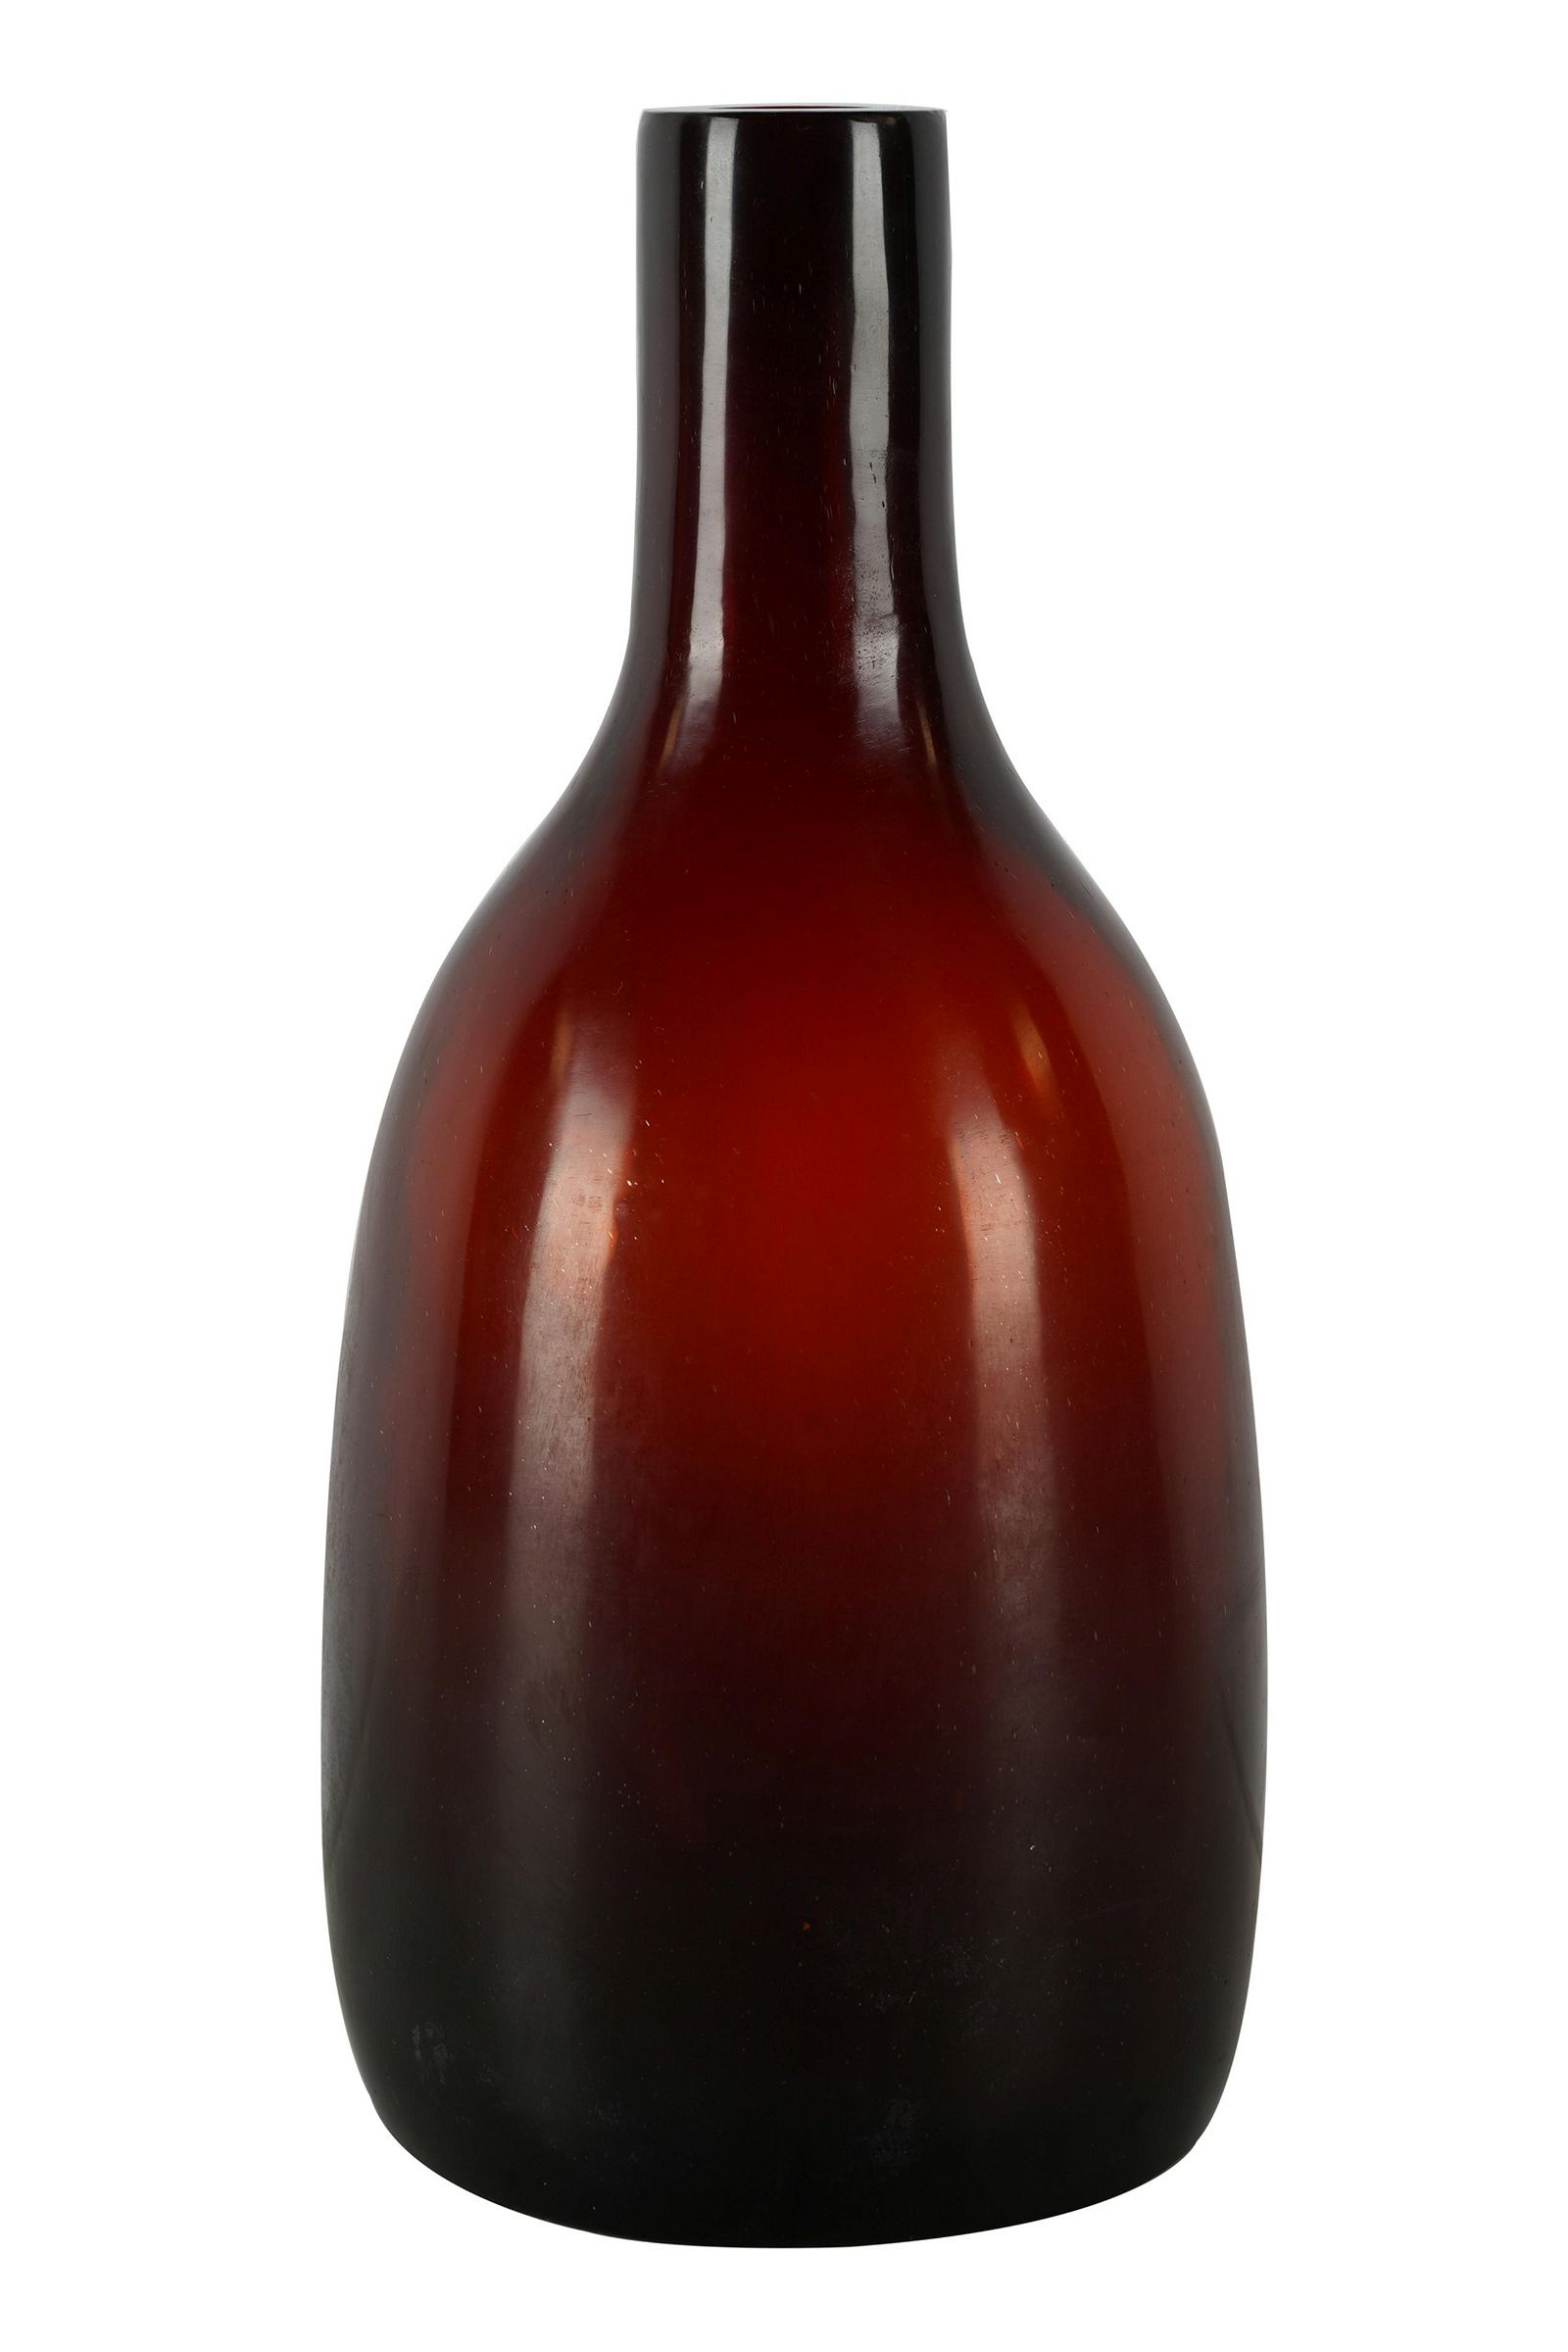 RED ART GLASS BOTTLE VASEwith illegible 3974c7